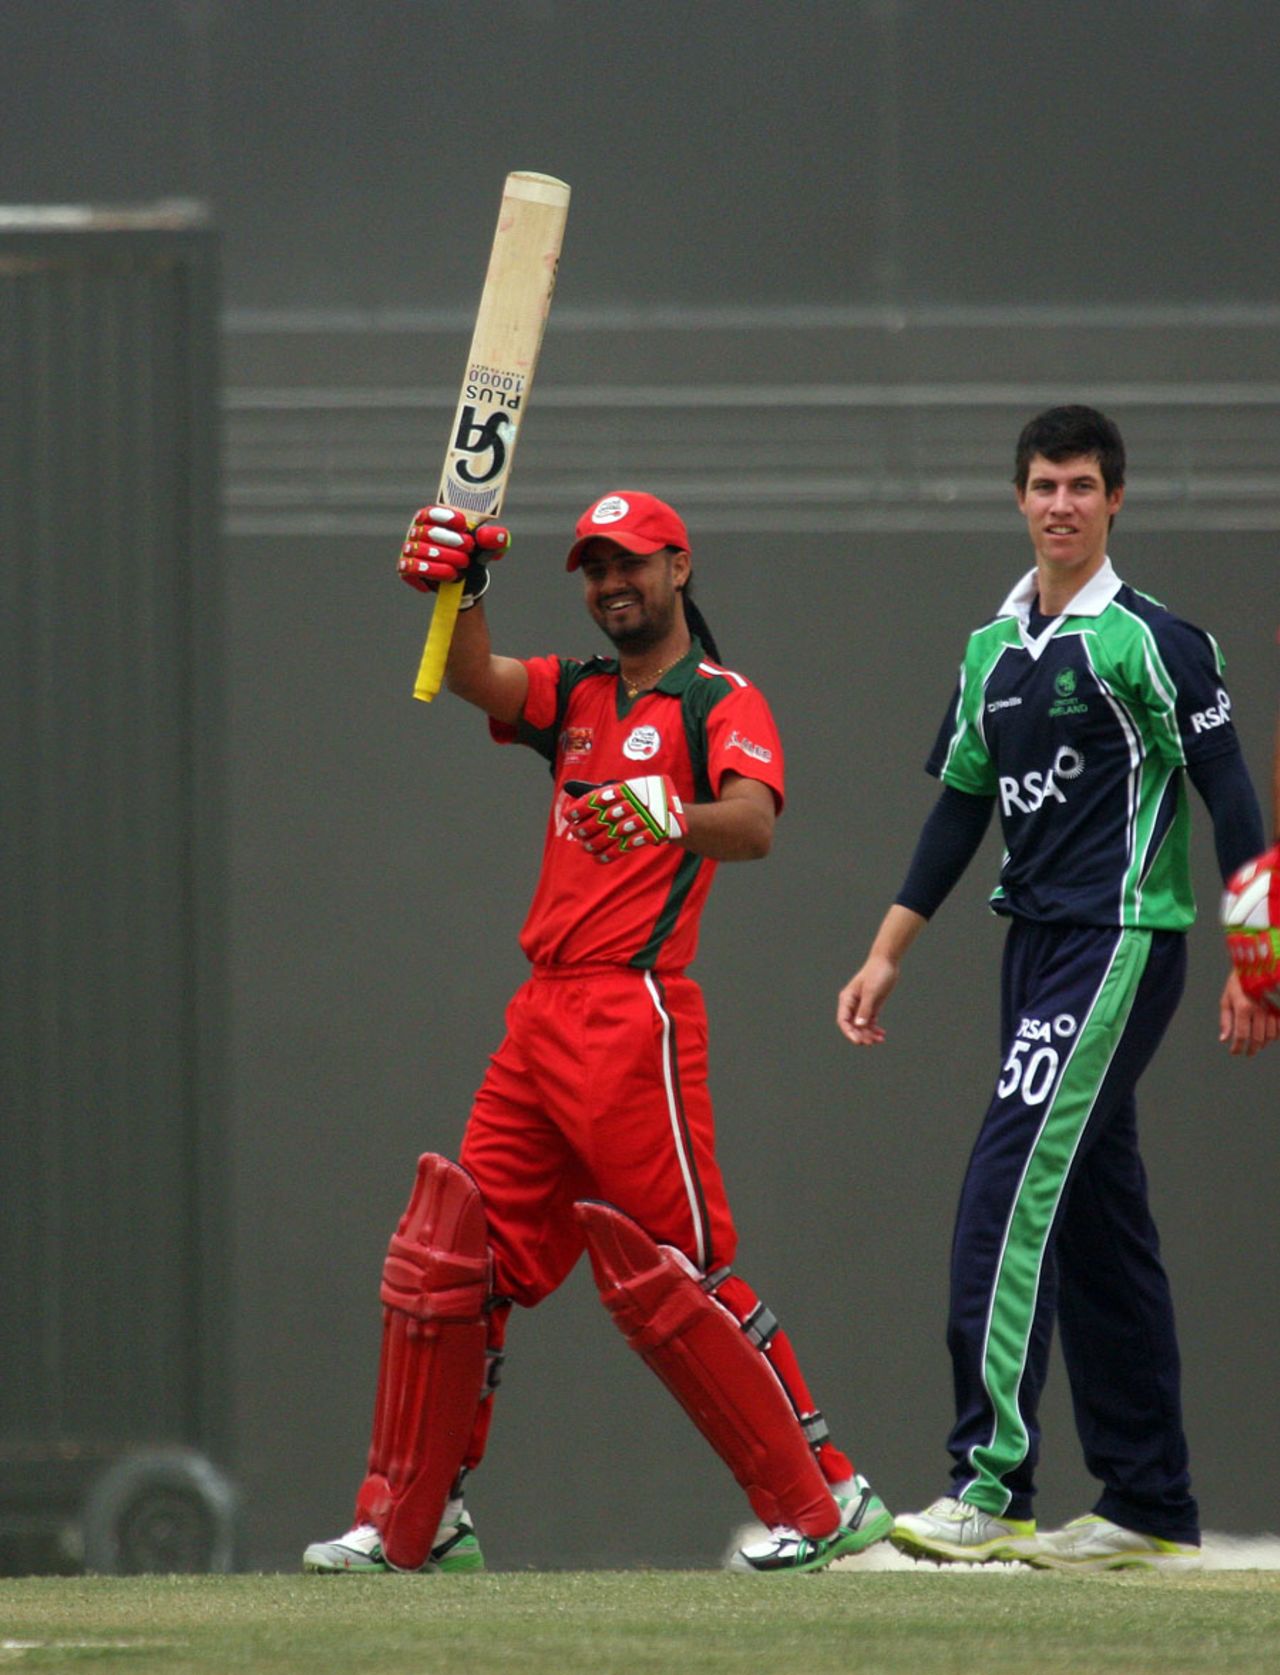 Jatinder Singh acknowledges the cheers after getting to his half-century, Italy v Scotland, ICC World Twenty20 Qualifier, Dubai, March 19, 2012